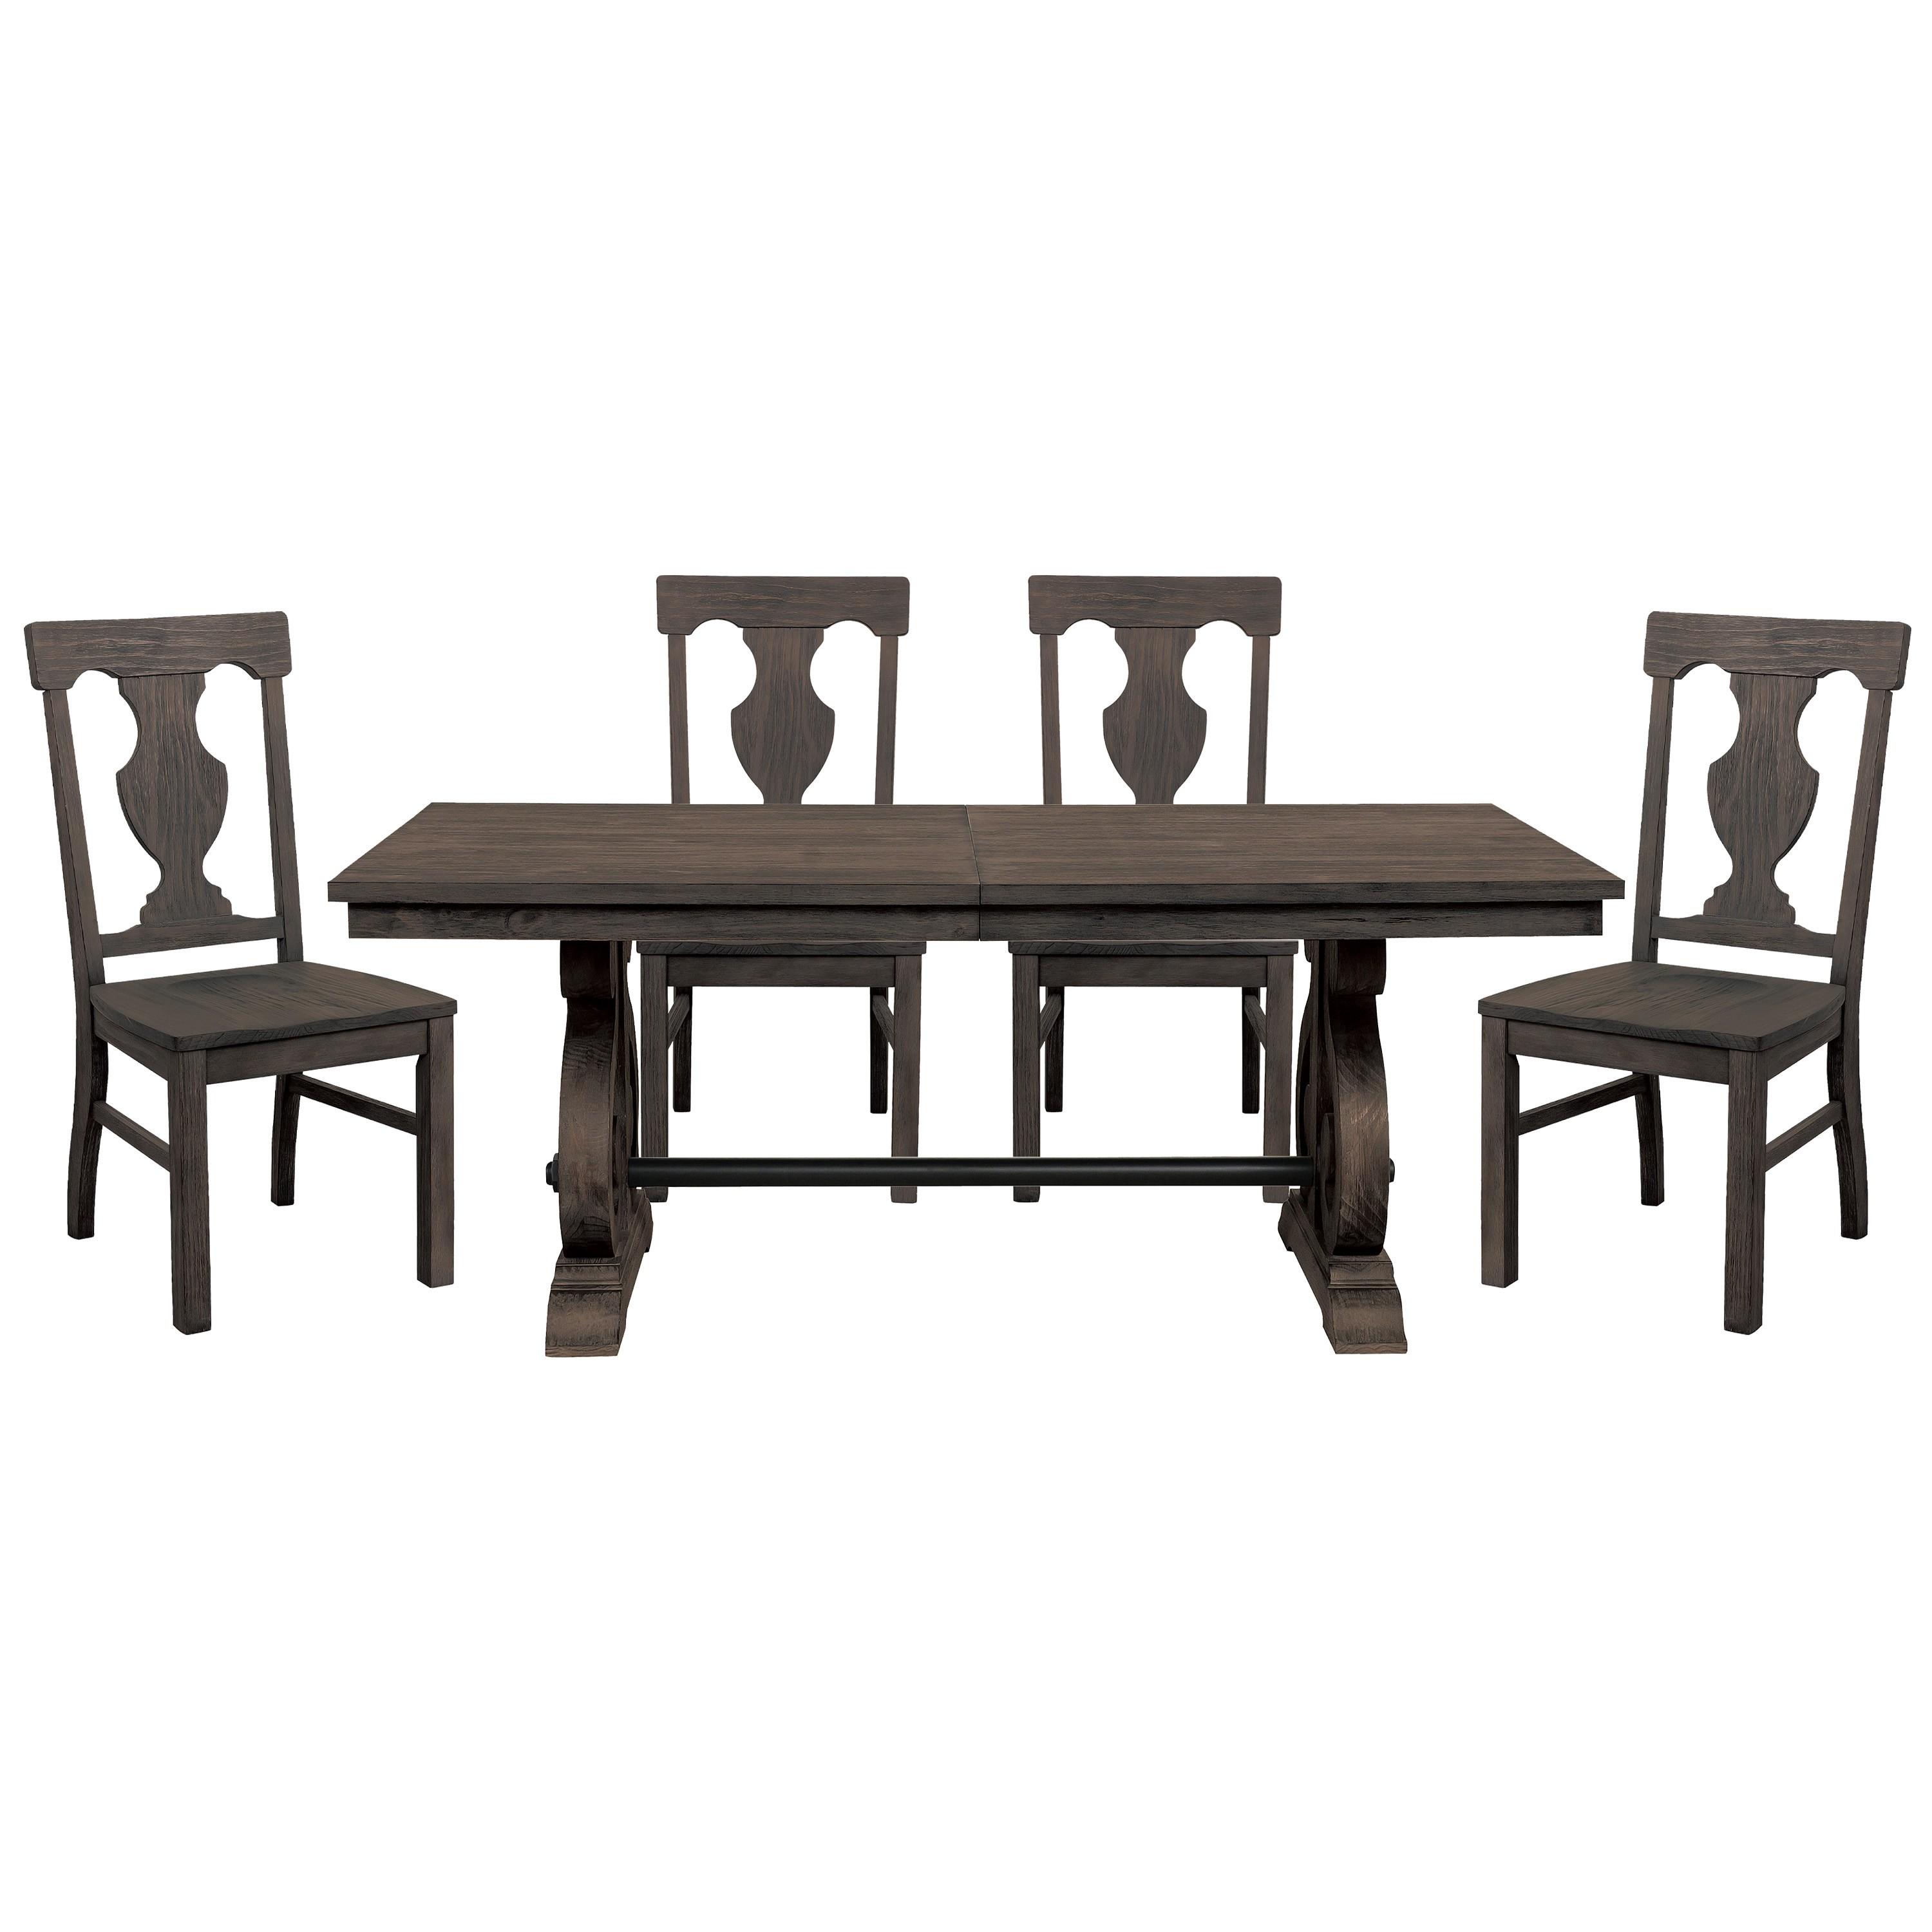 Traditional Dining Room Set 5438-96*5PC Toulon 5438-96*5PC in Dark Oak 